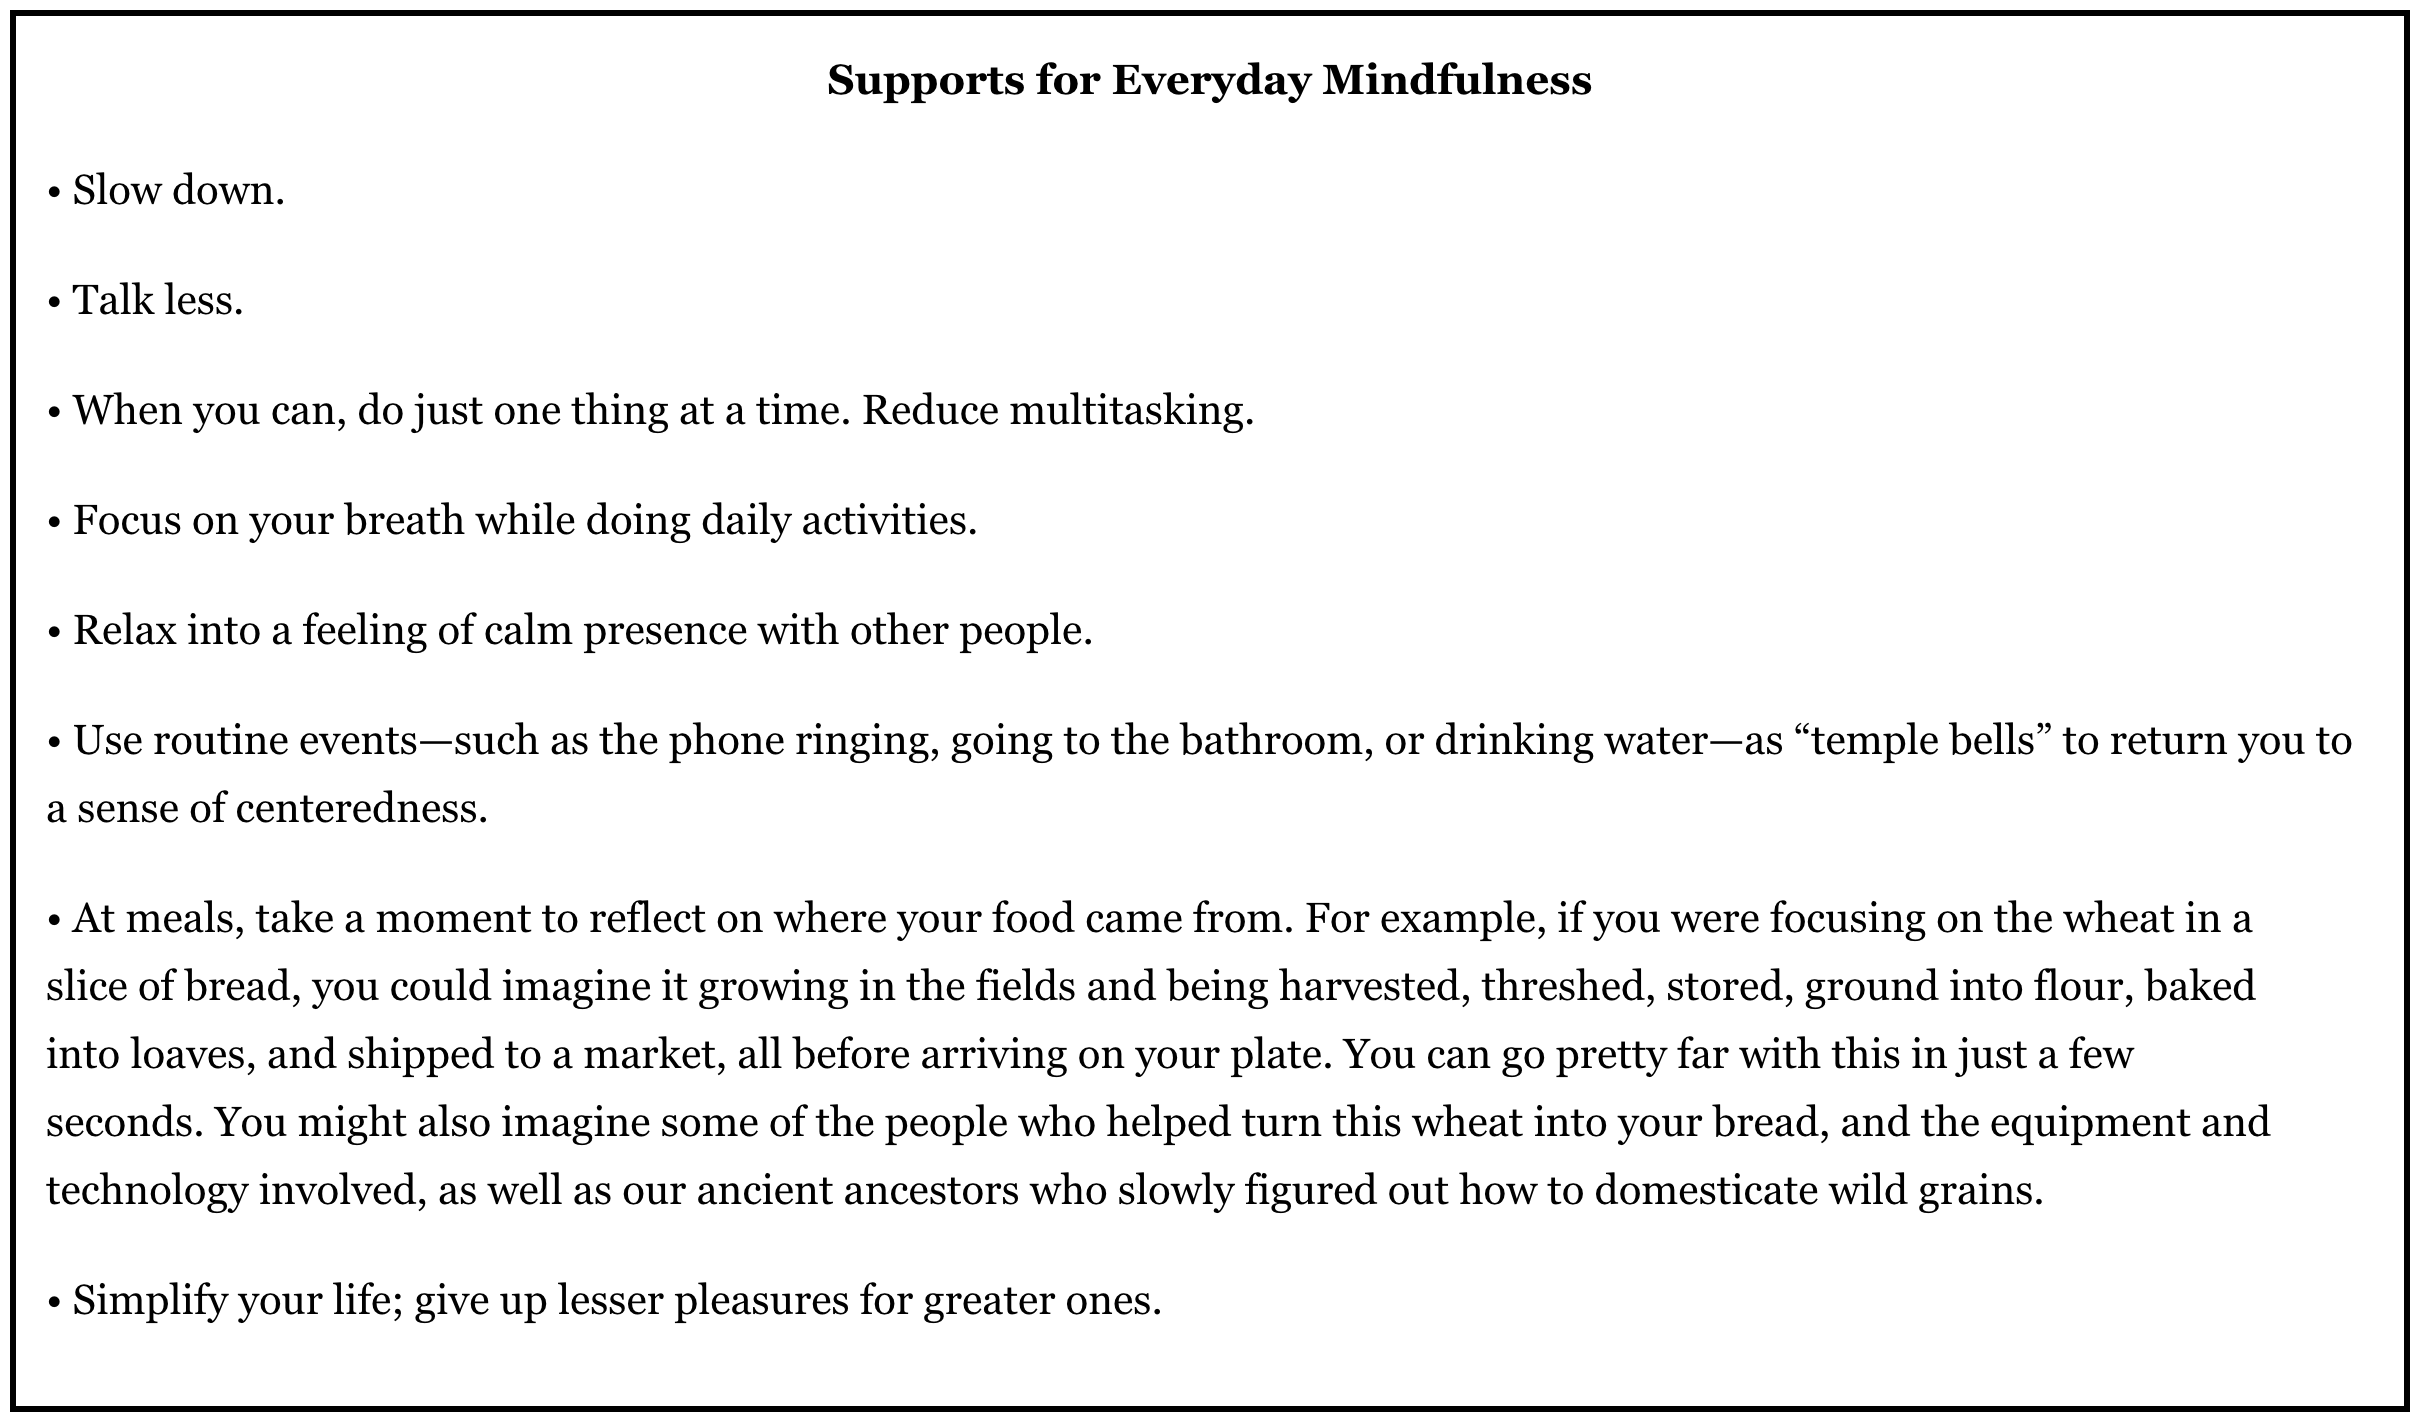 List of supports for everyday mindfulness including slow down, talk less, reduce multitasking, and focusing on your breath.